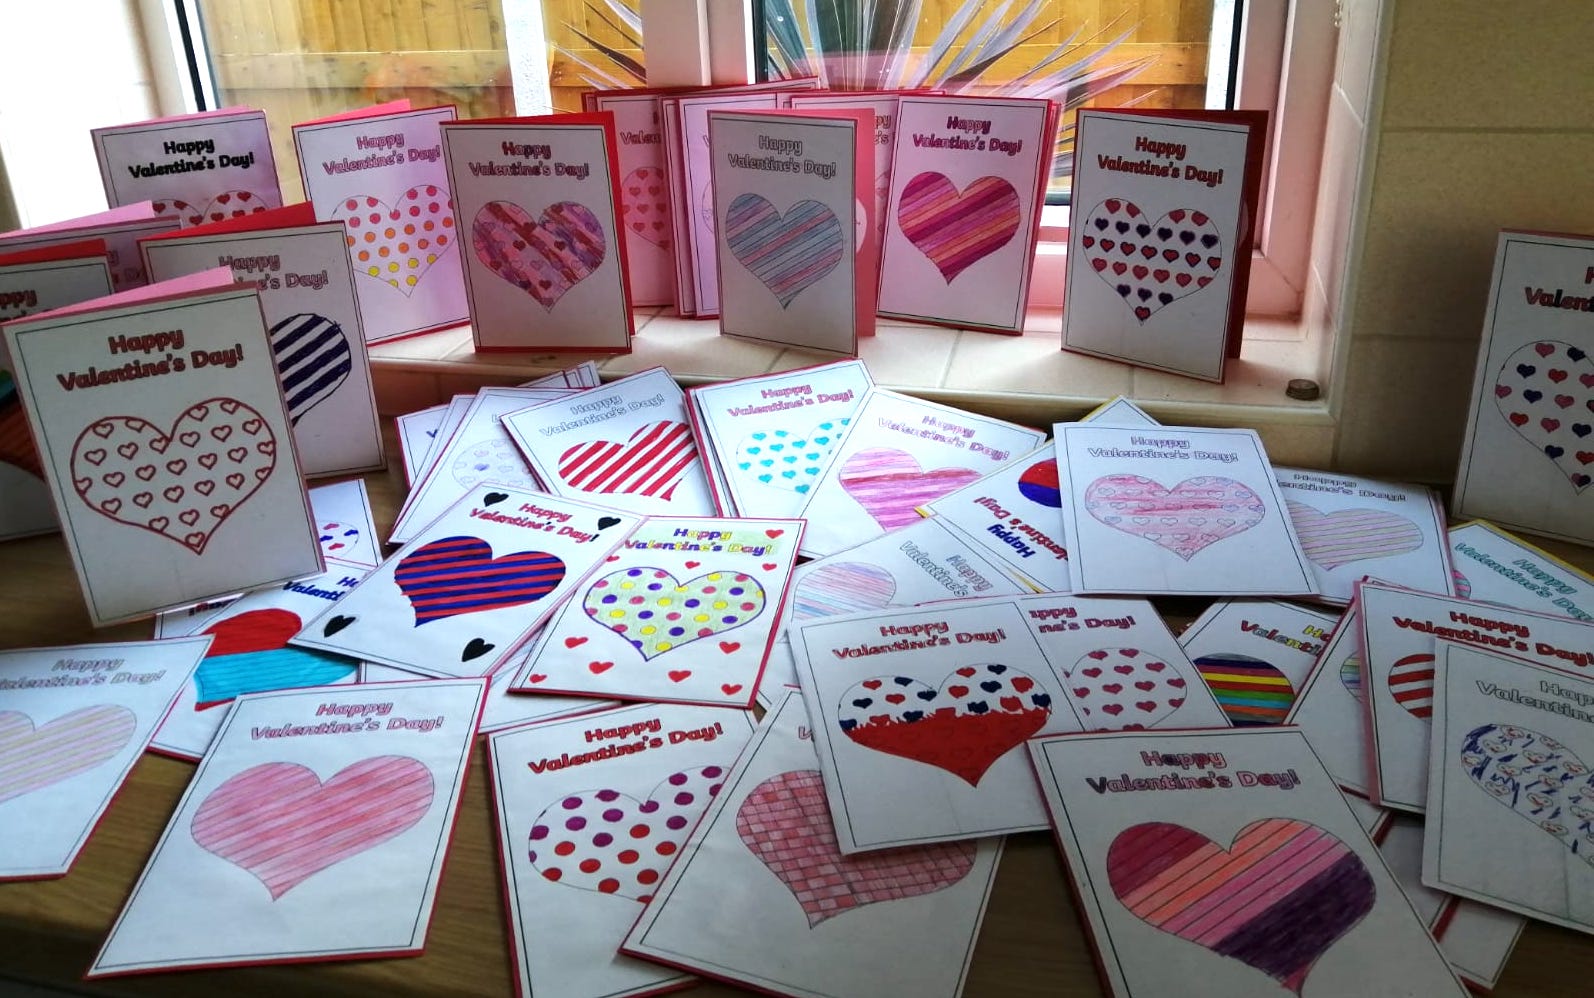 A selection of fabulous Valentine Cards designed and created by the Minnie Vinnies at St Aelred's Primary School, York